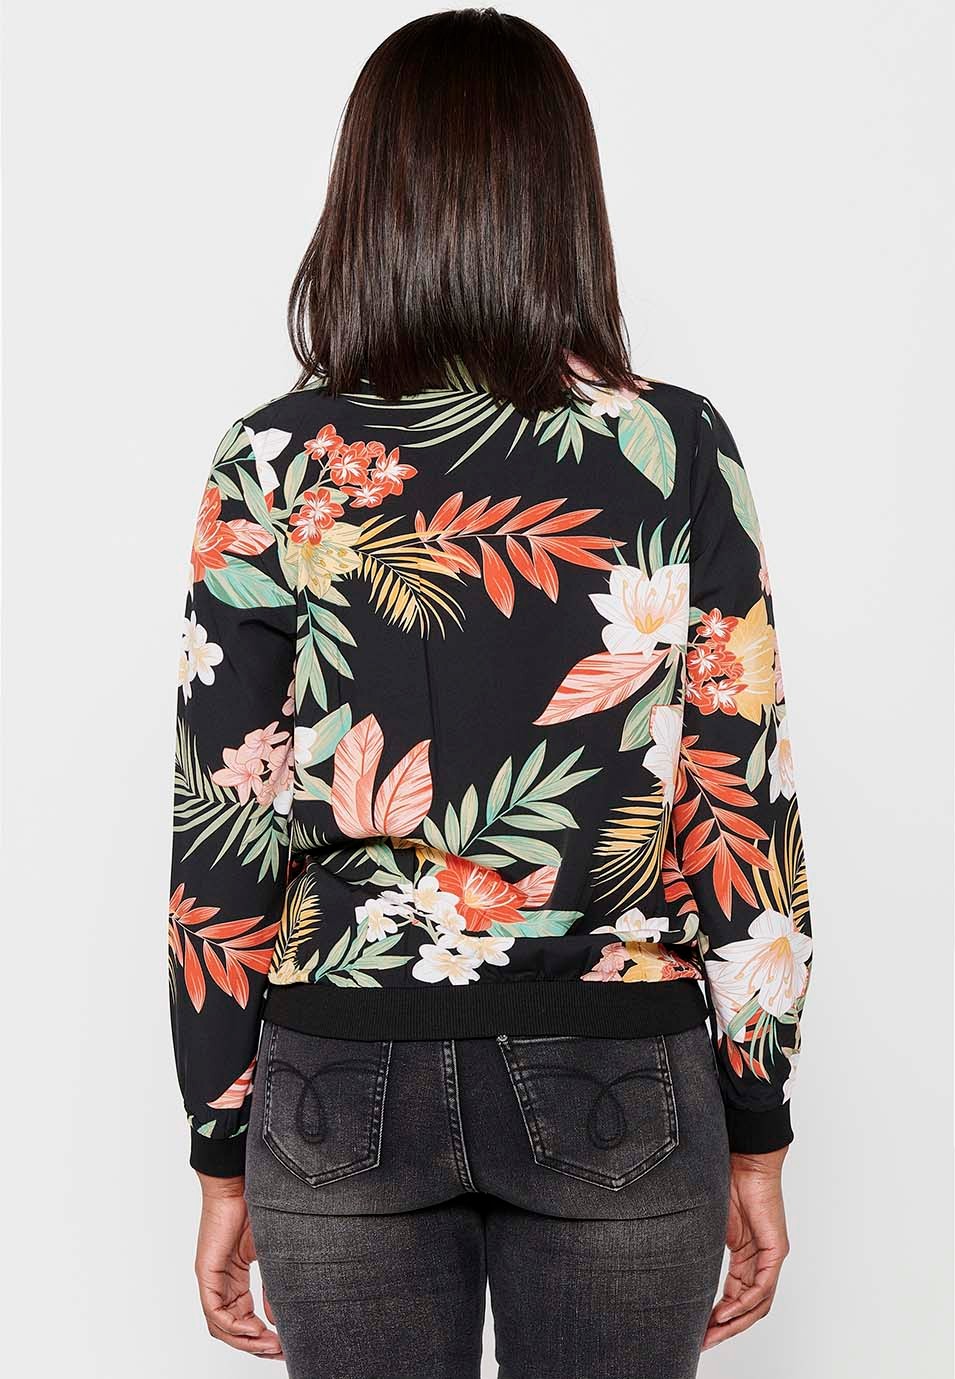 Long-sleeved sweatshirt jacket with ribbed finishes and floral print with front zipper closure in Multicolor for Women 5